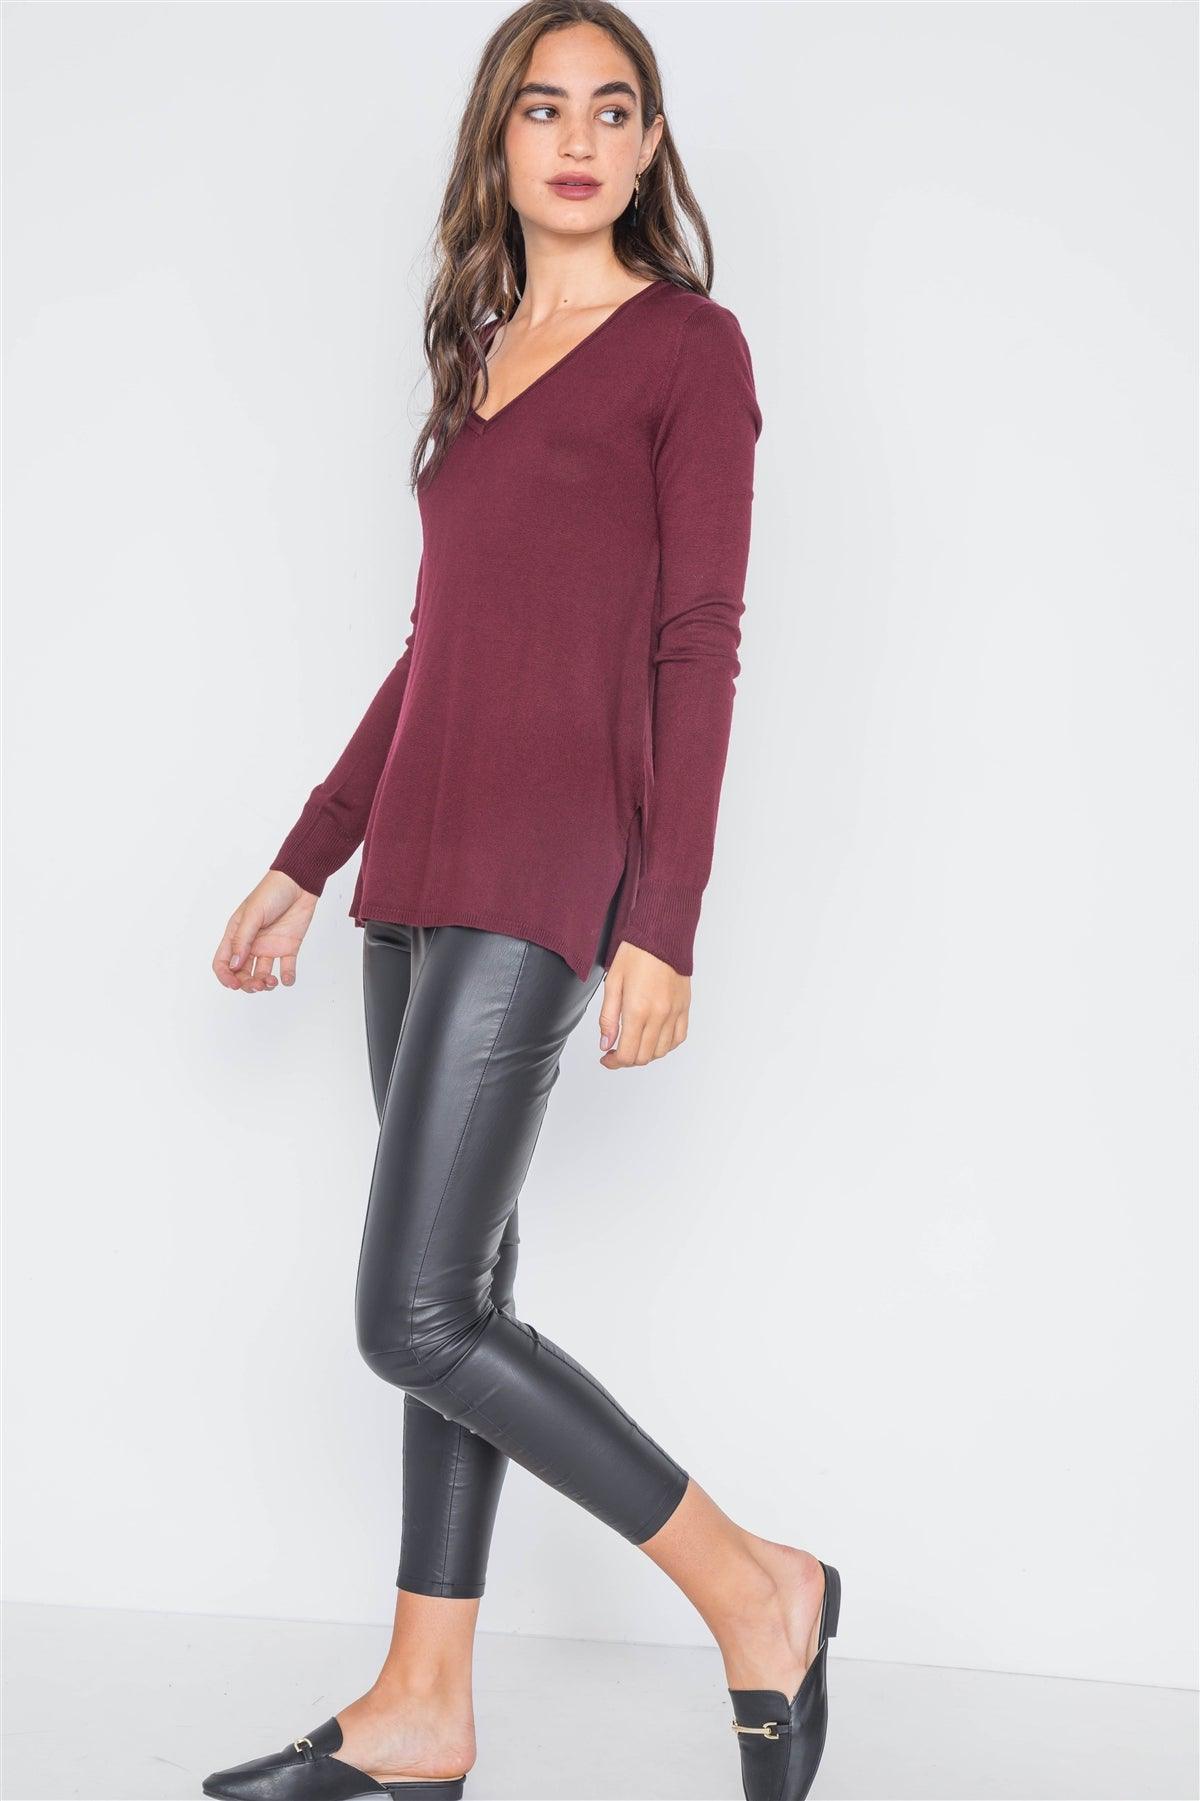 Burgundy Knit Casual V-Neck Solid Sweater